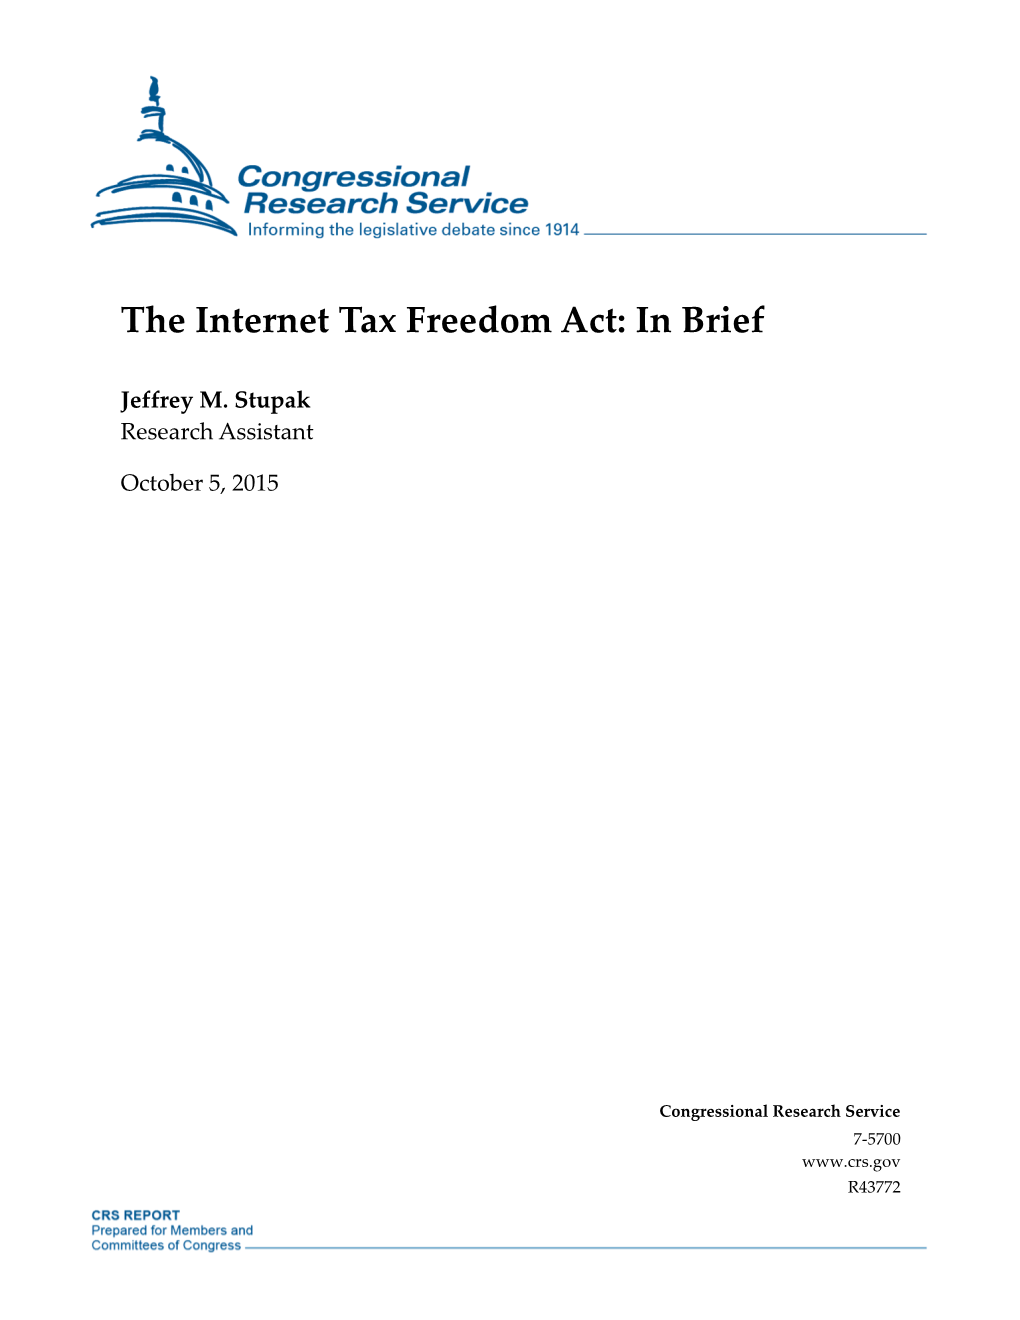 The Internet Tax Freedom Act: in Brief